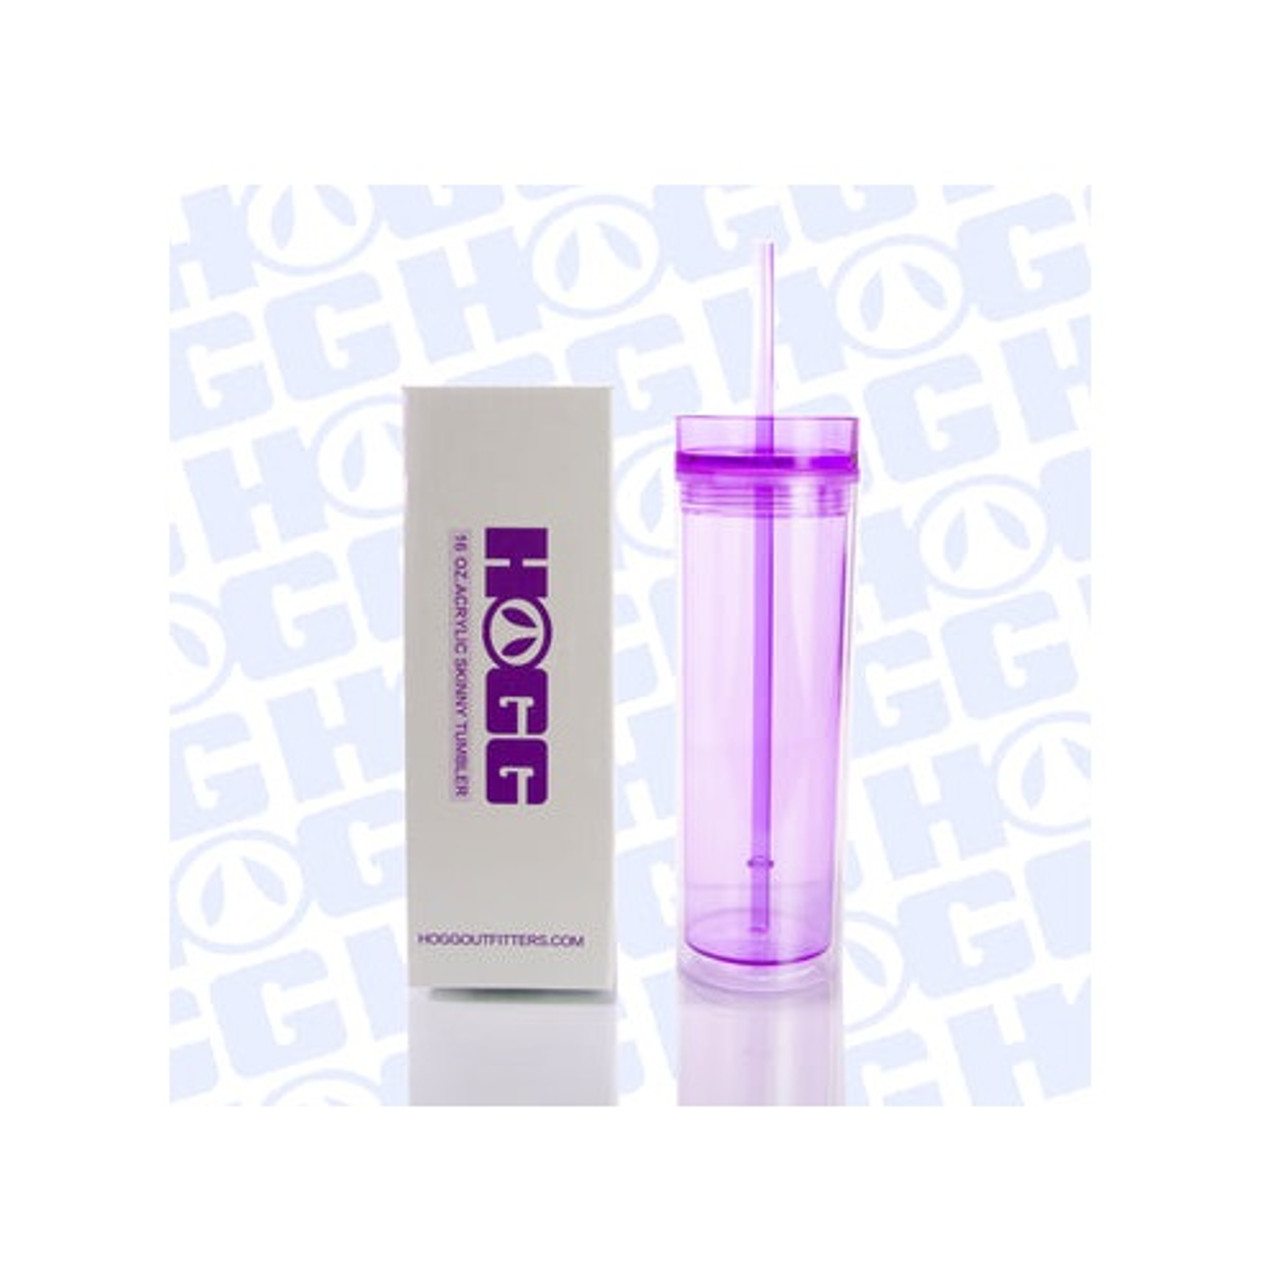 Acrylic Tumbler with Straw - 16oz - Purple
Double-Wall
Lid with straw opening 
Straw
Comes individually boxed